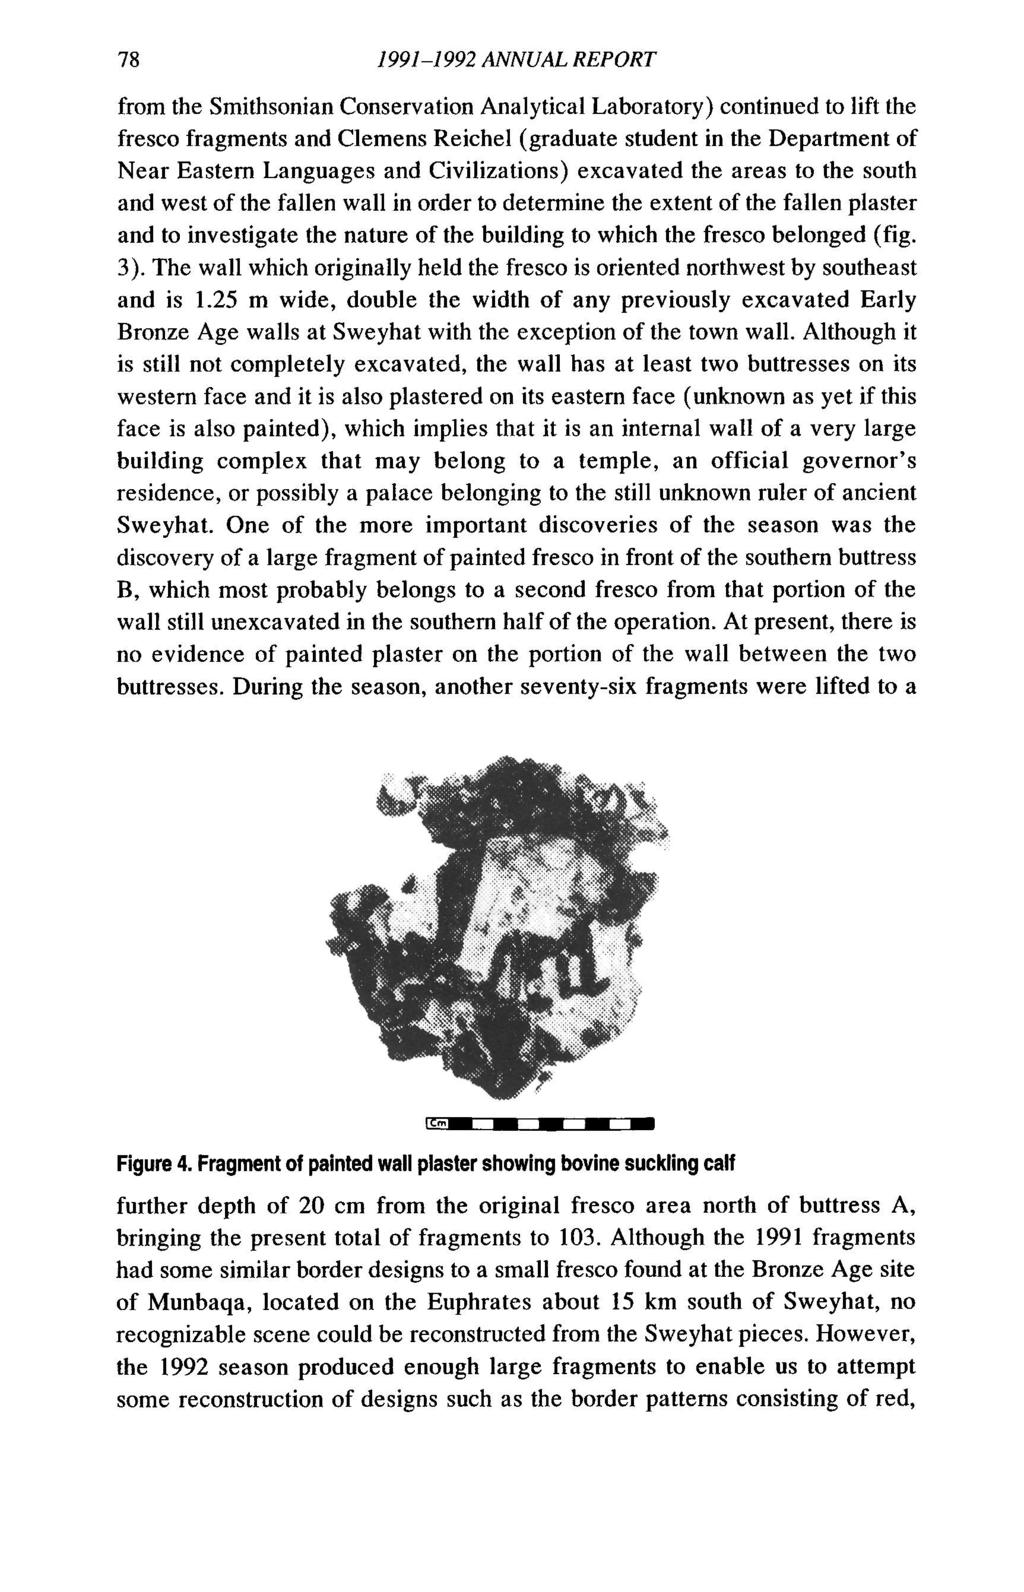 78 1991-1992 ANNUAL REPORT from the Smithsonian Conservation Analytical Laboratory) continued to lift the fresco fragments and Clemens Reichel (graduate student in the Department of Near Eastern